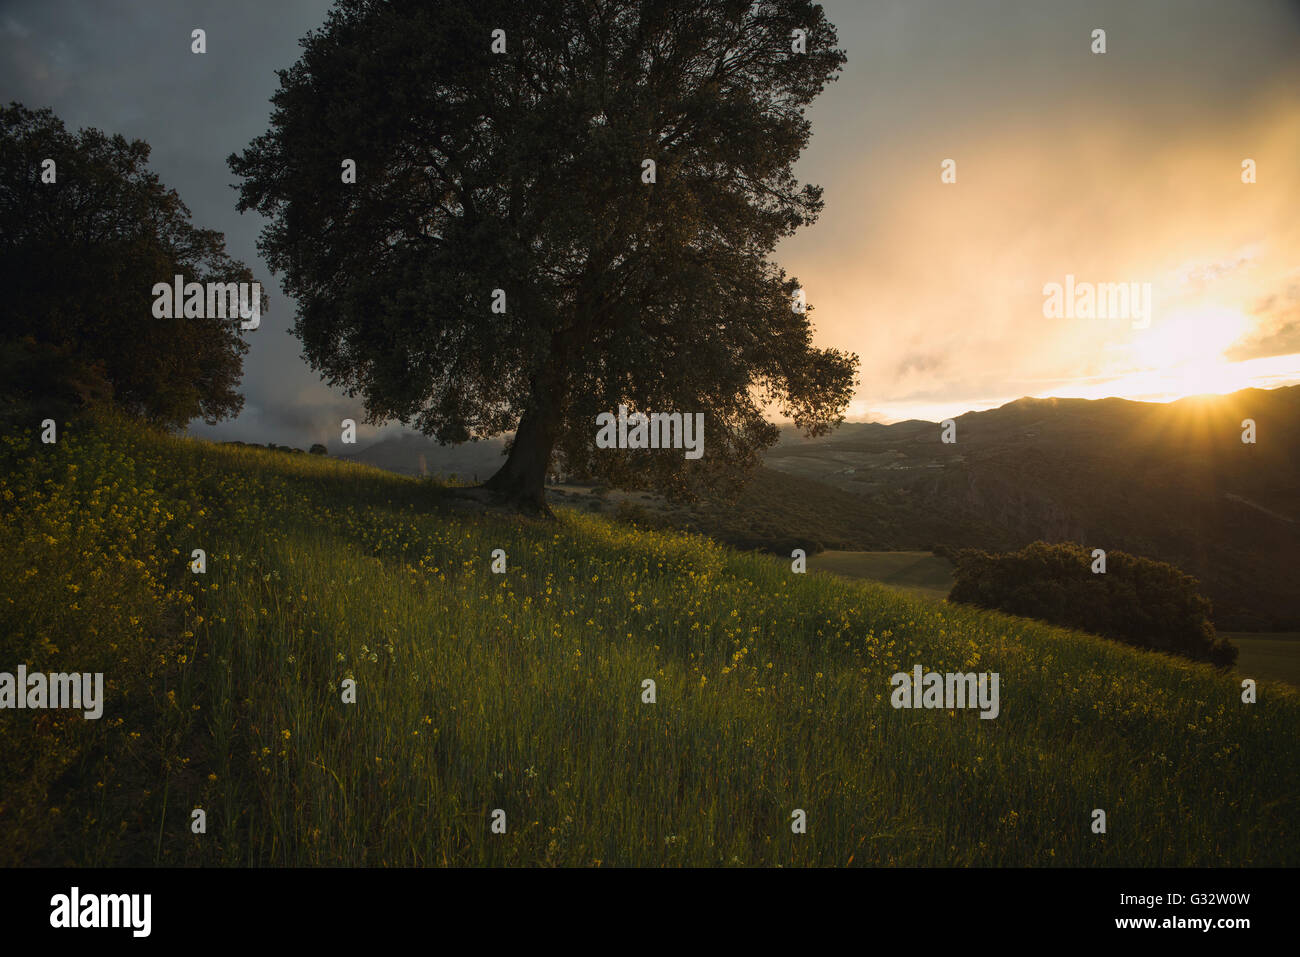 Tree in field at sunset, Granada, Andalucia, Spain Stock Photo